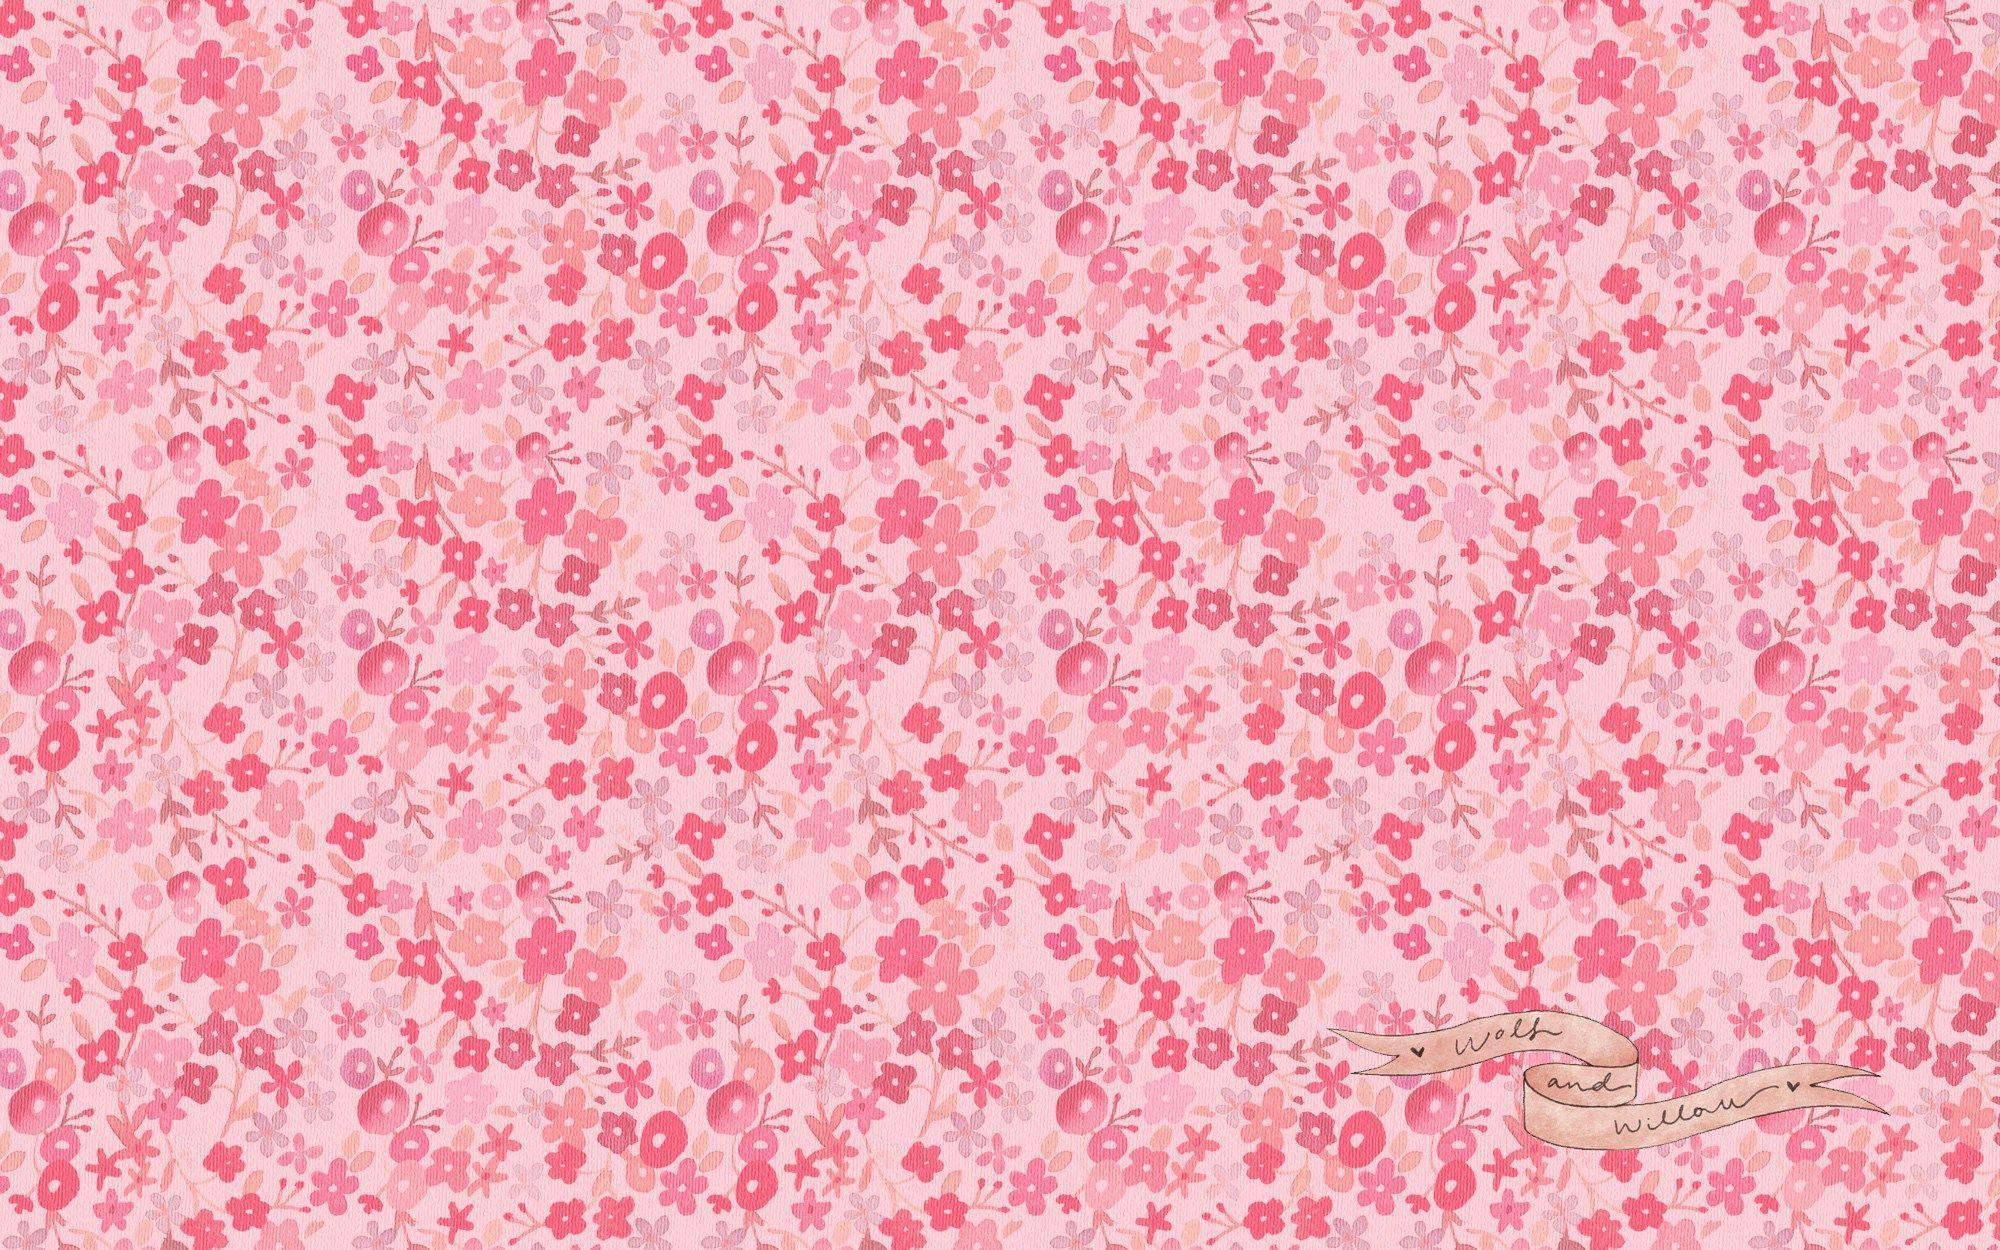 Girly Wallpaper In HQ Pict For Background 5I0